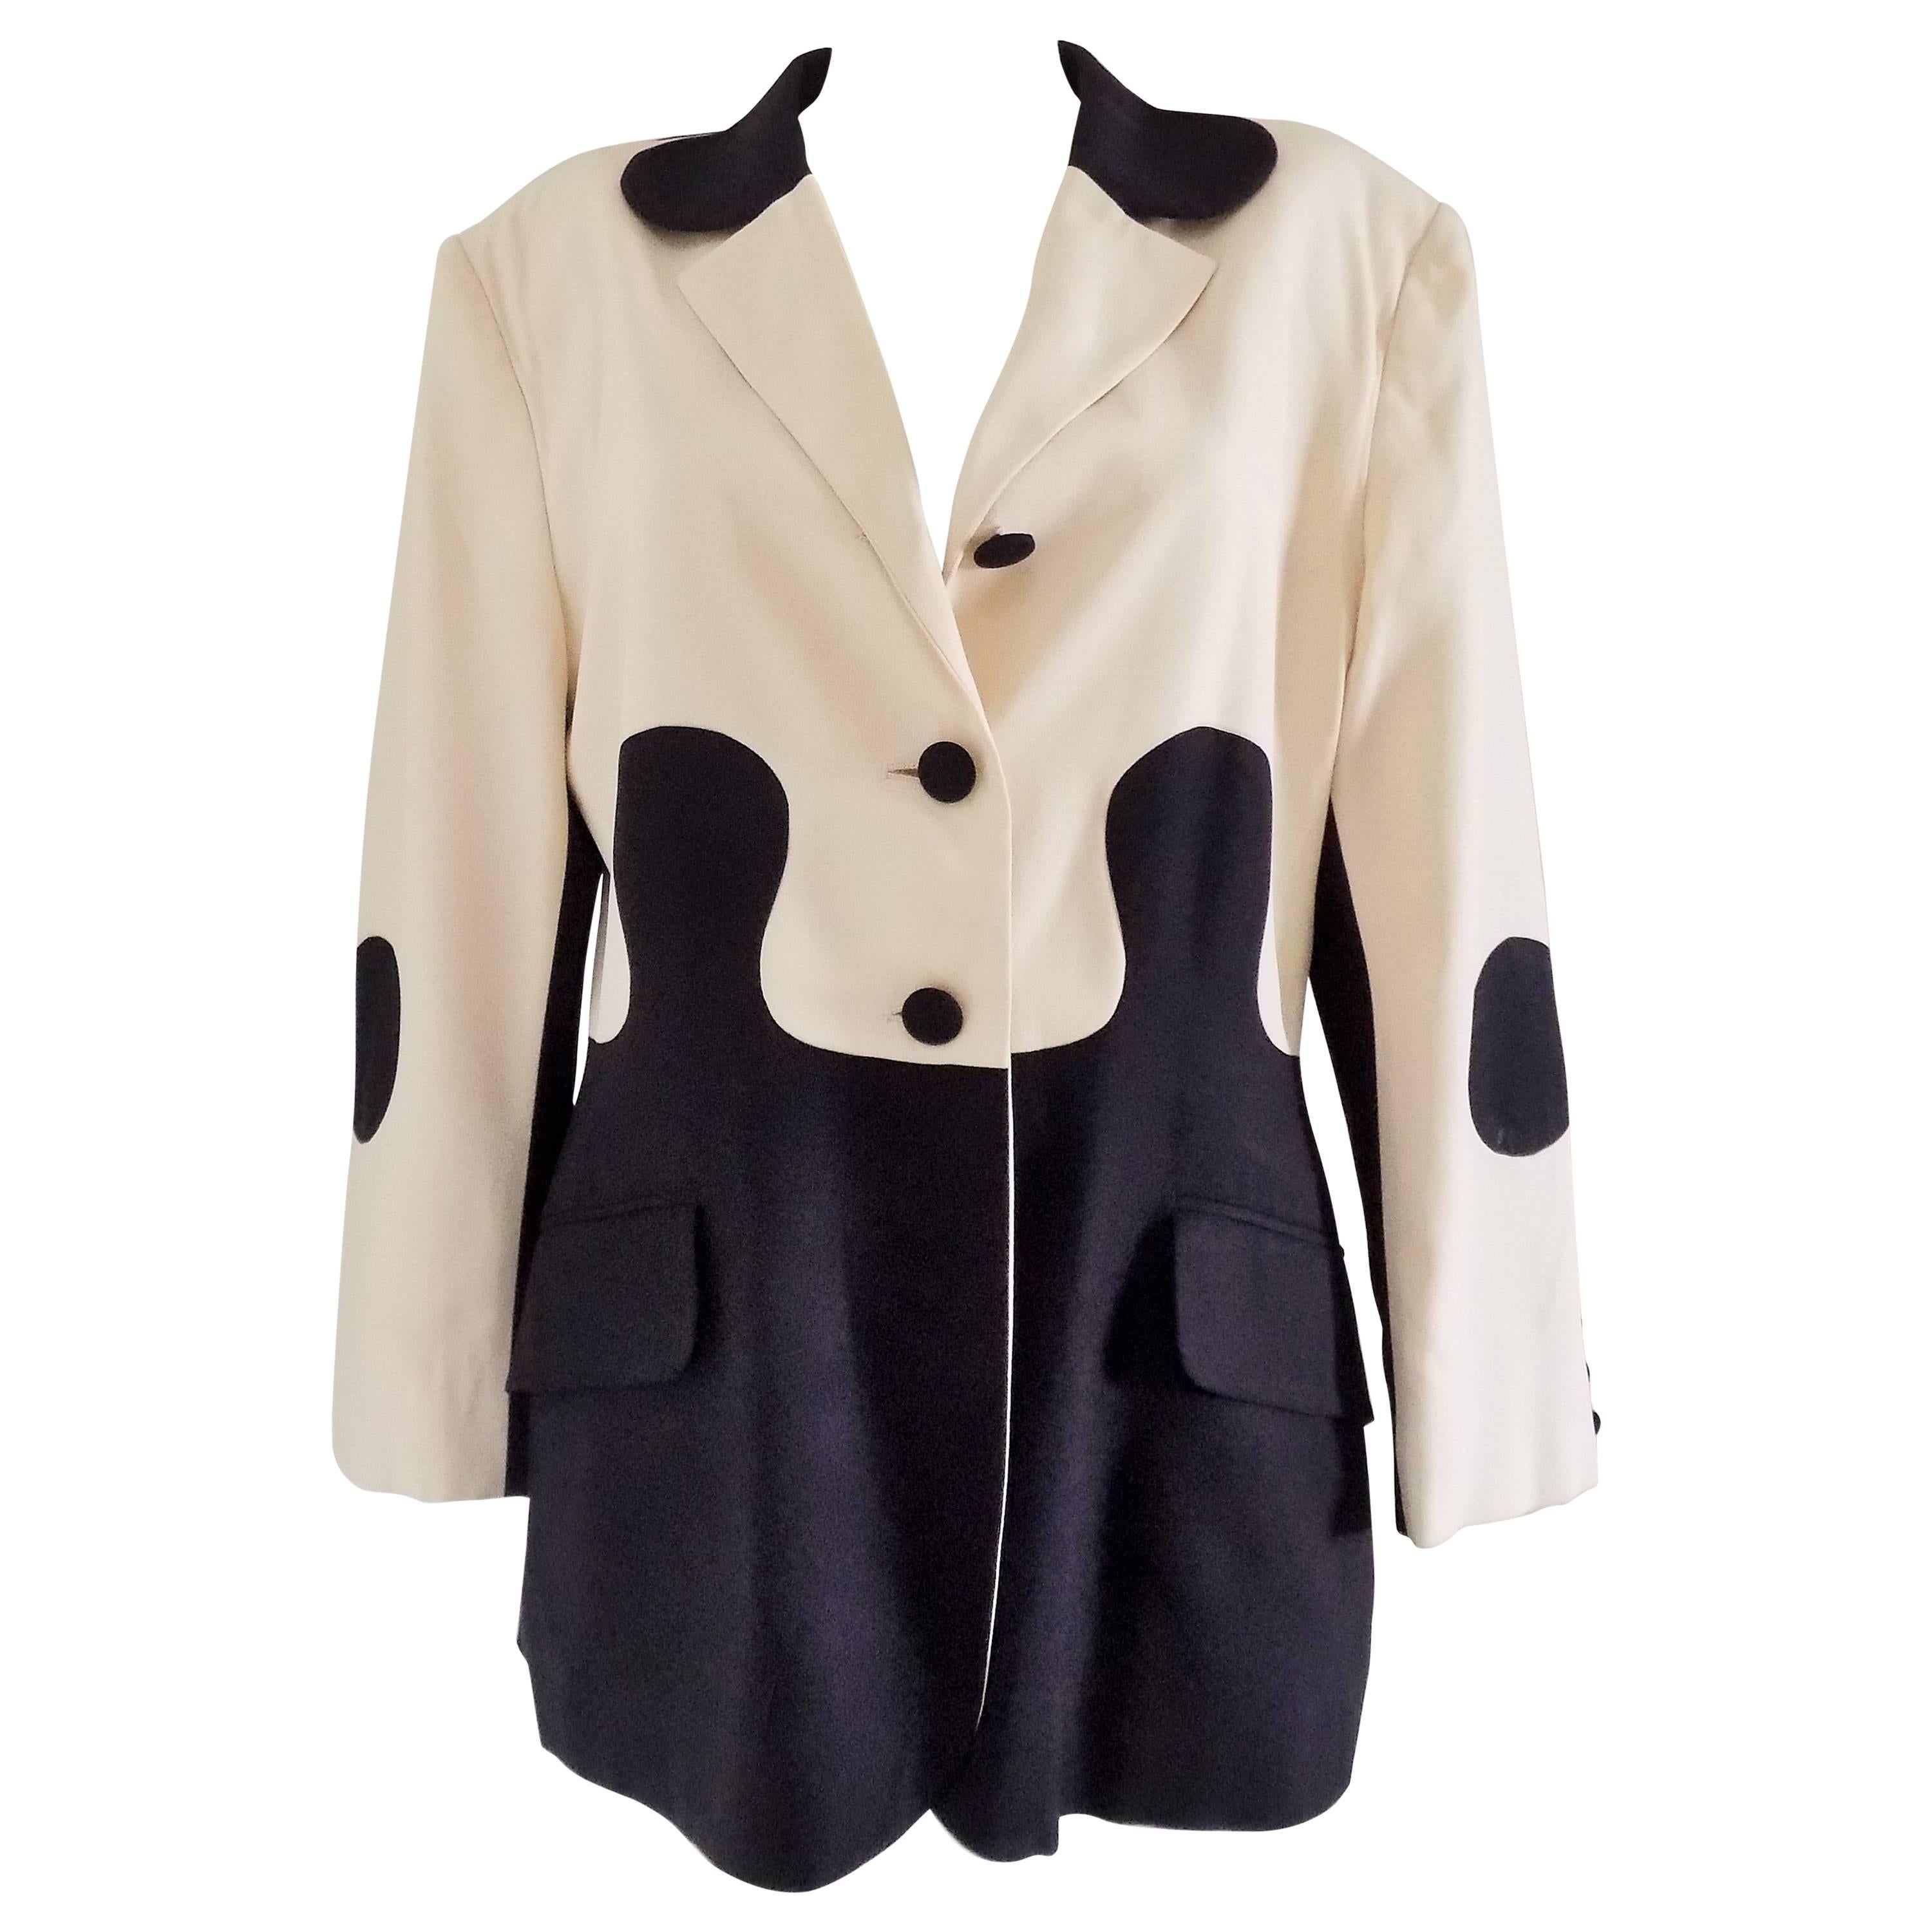 1980s Moschino Cheap & Chic "Puzzle" jacket